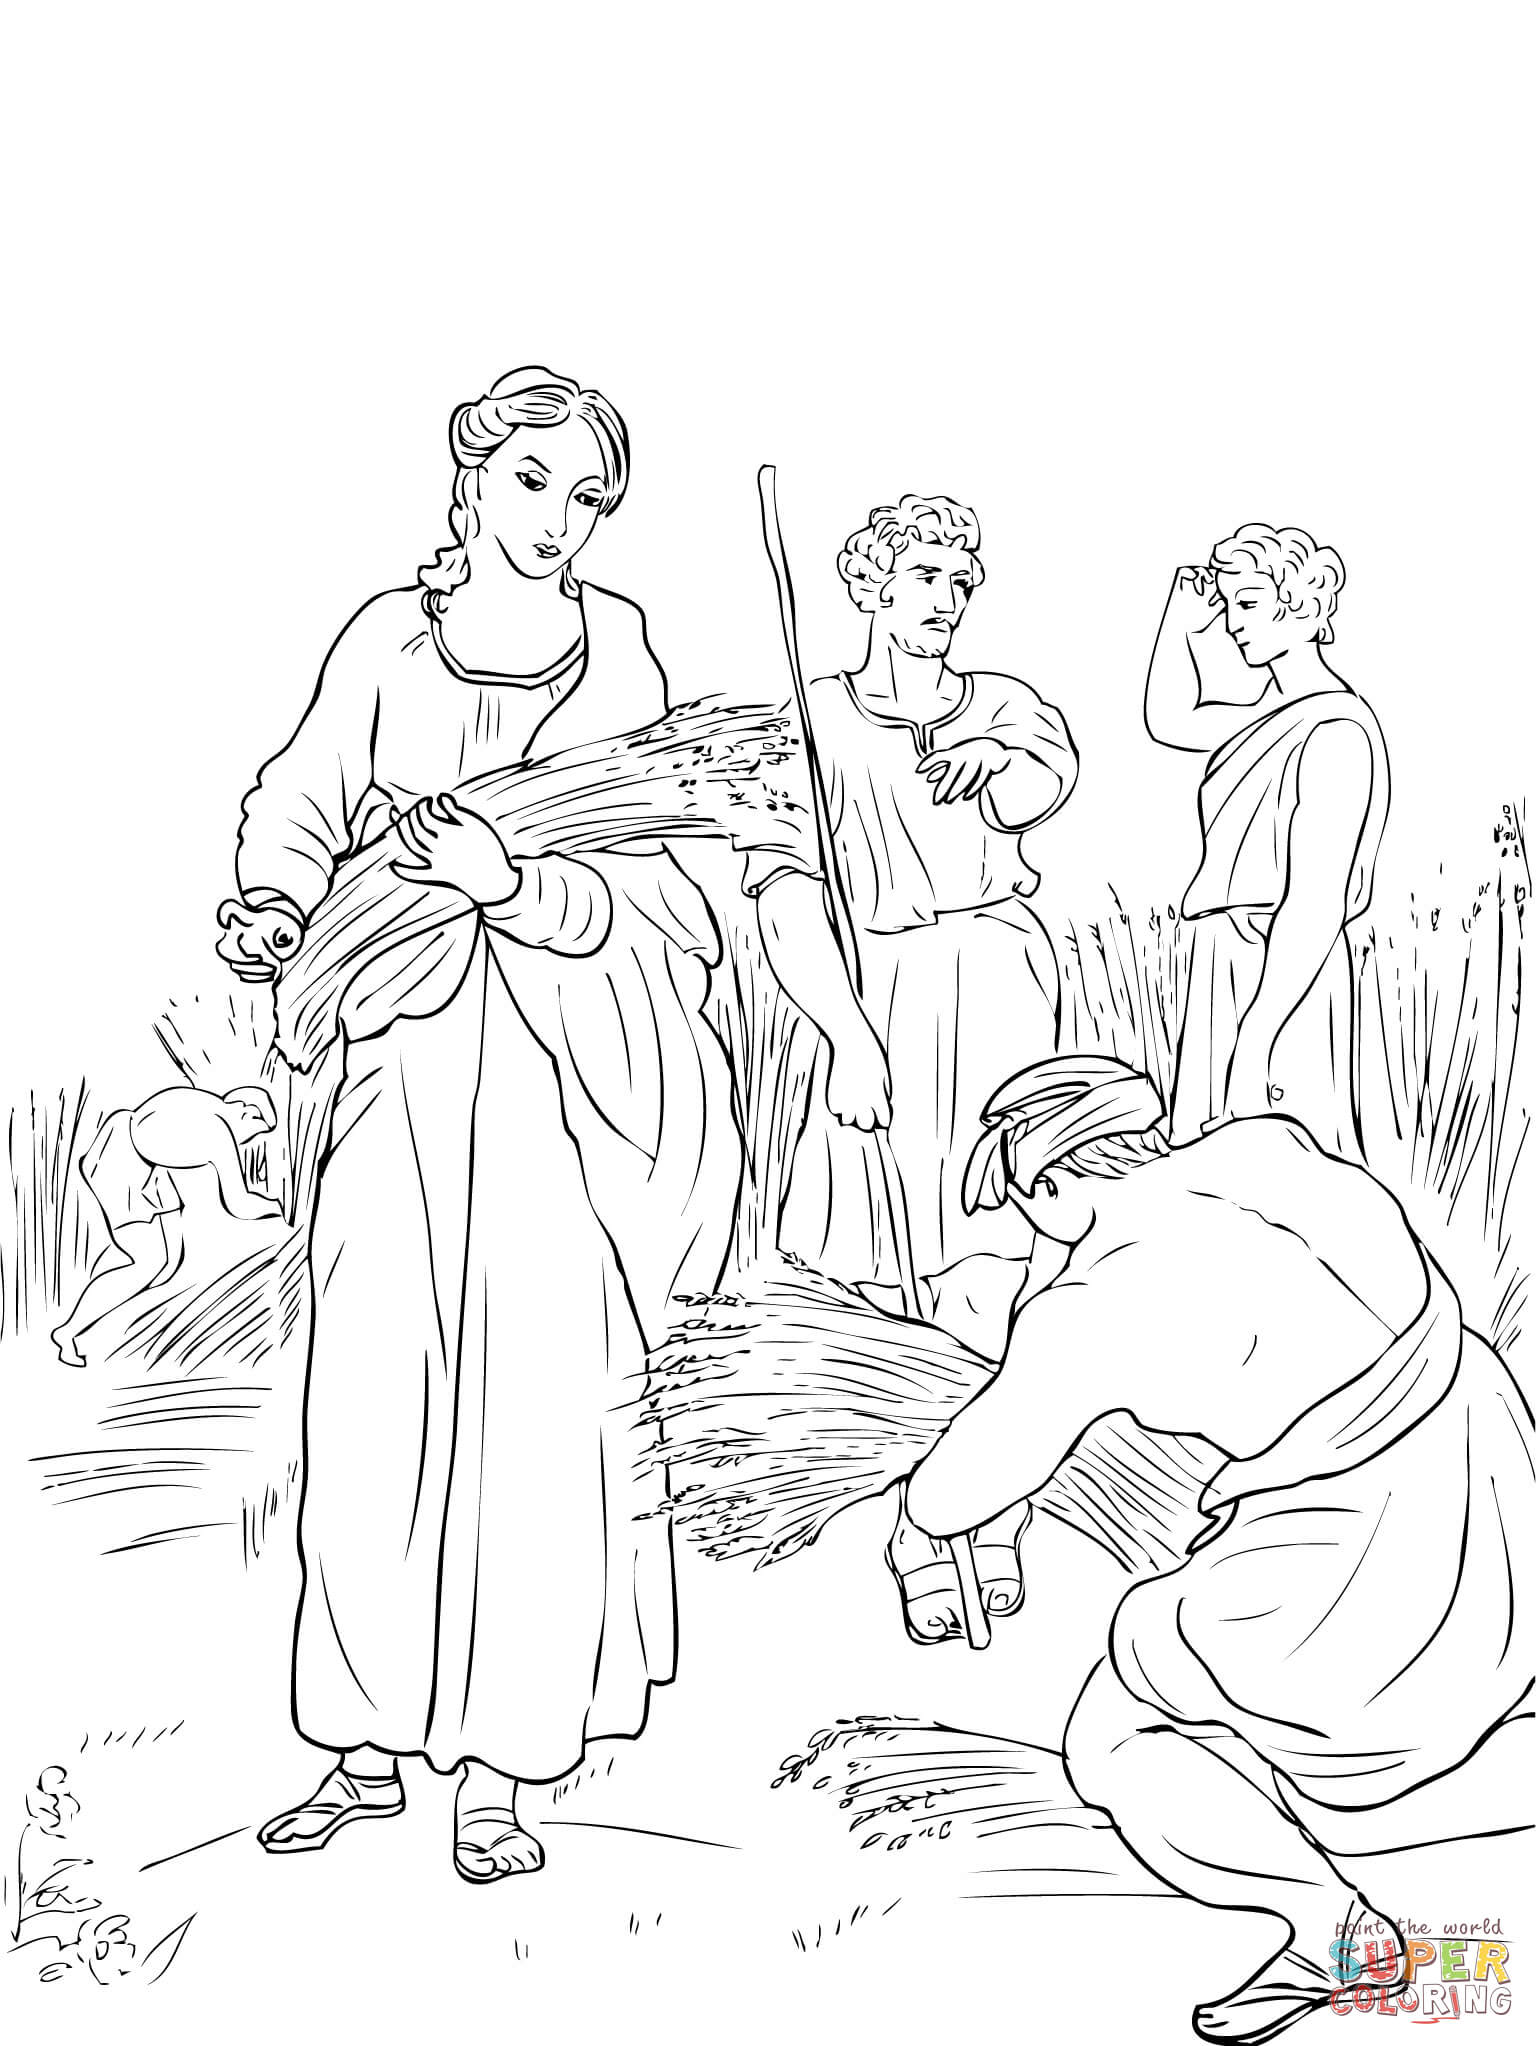 Ruth and Boaz coloring page | Free Printable Coloring Pages